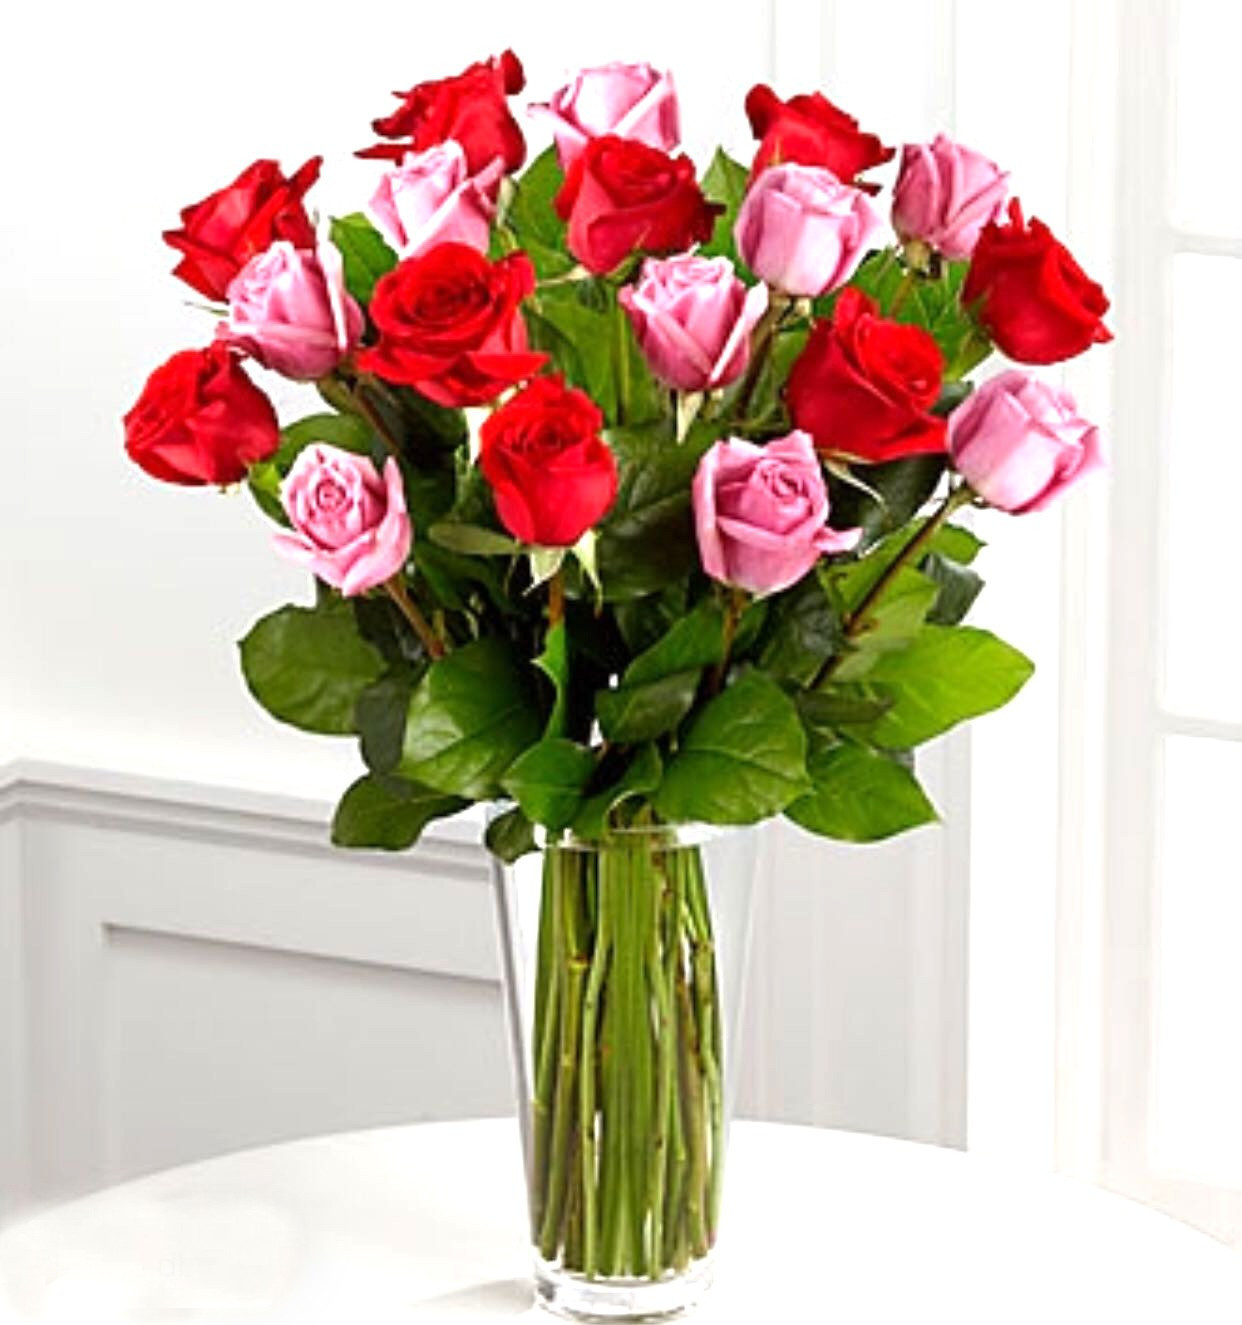 19 Awesome Artificial Flowers In Vase with Water 2024 free download artificial flowers in vase with water of pink flowers image awesome pink roses with wax flowerh vases in a throughout pink flowers image awesome pink roses with wax flowerh vases in a vase f